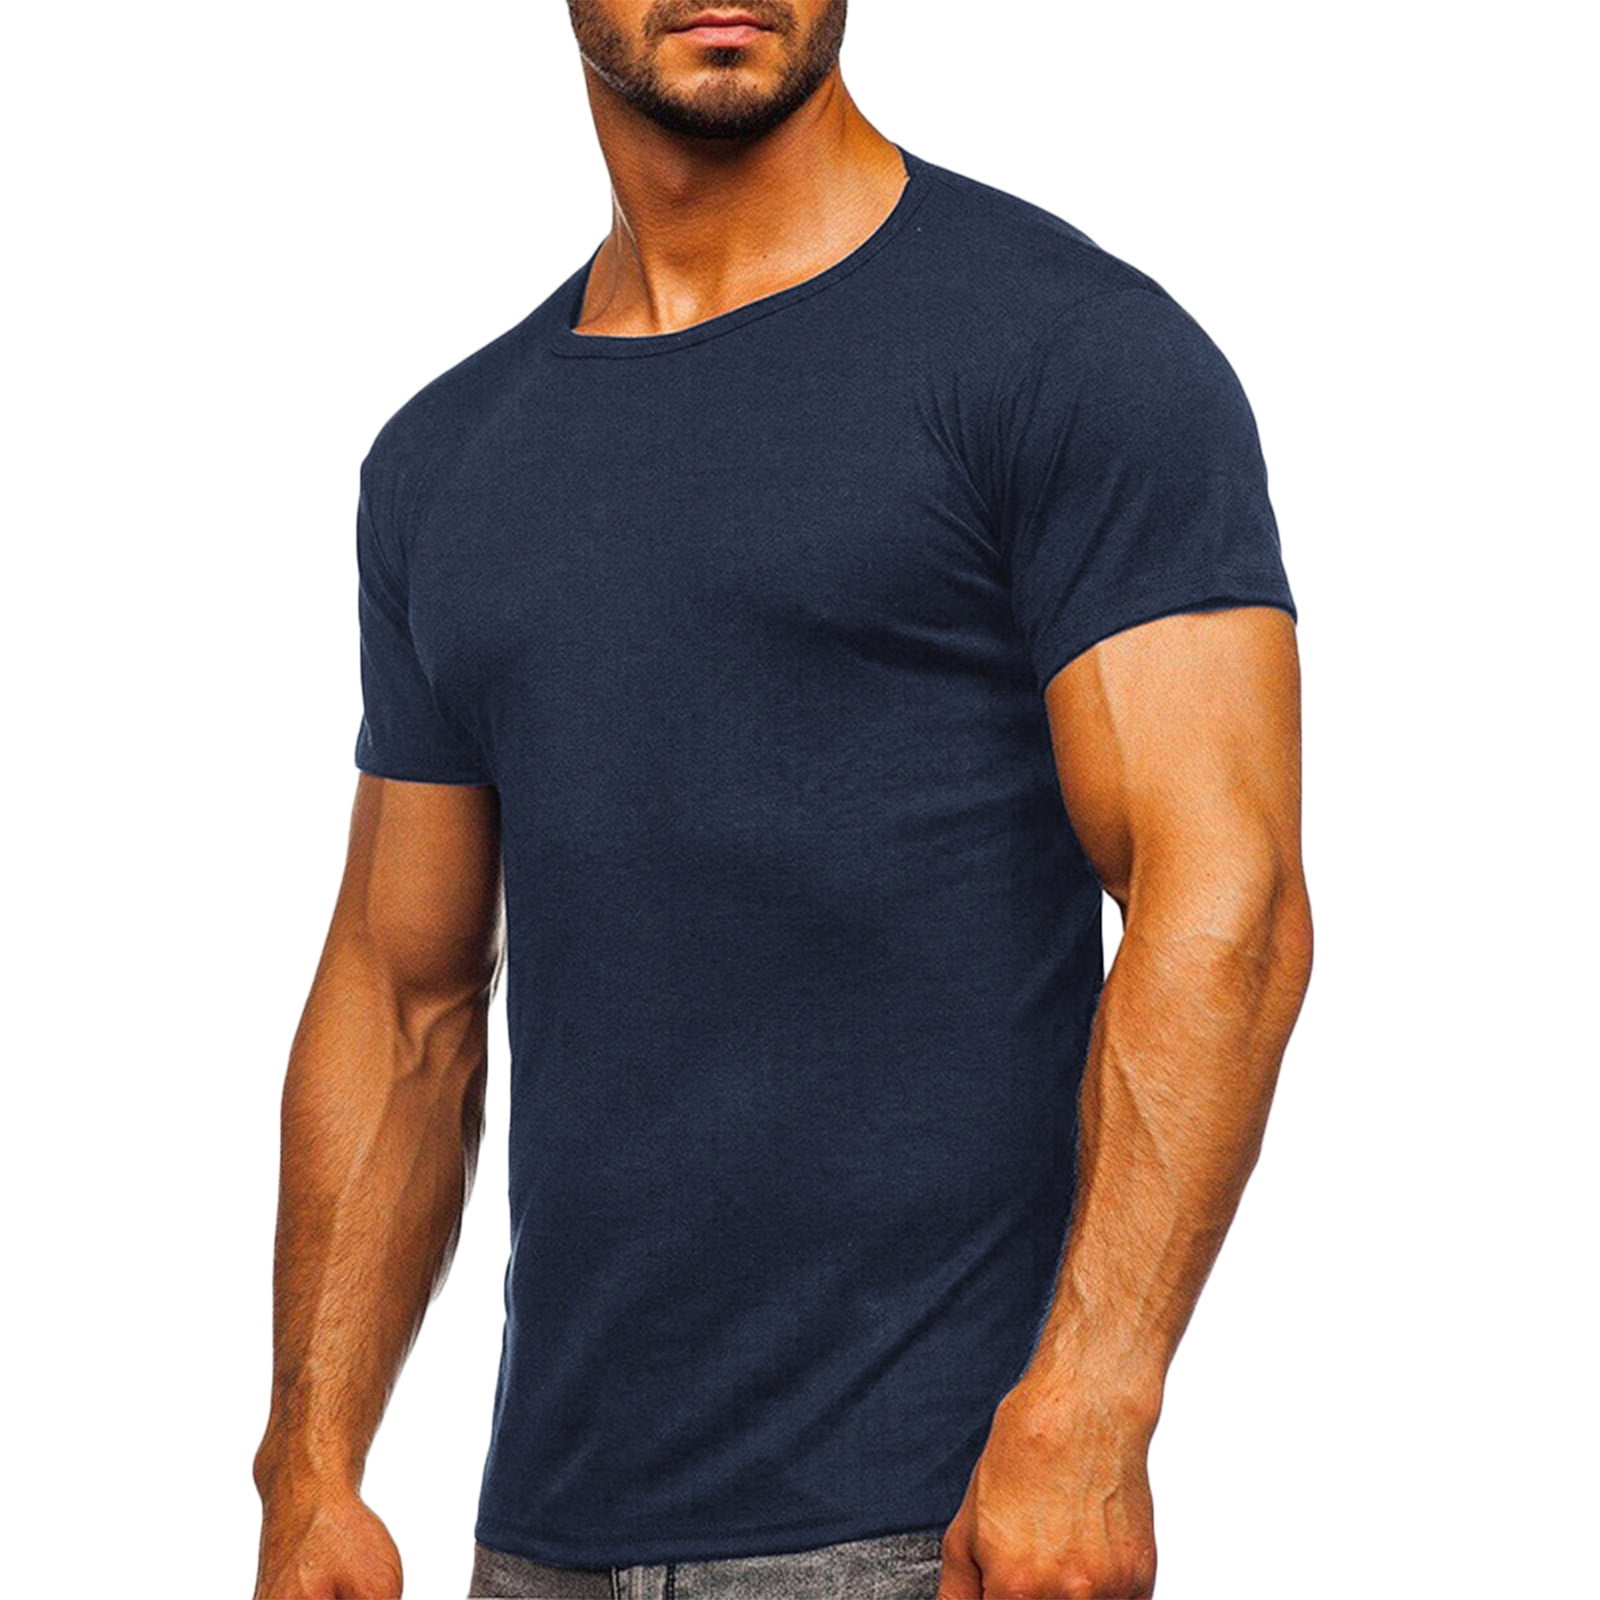 Basic Muscle Tee for Men Gym Workout Crewneck T Shirt Summer Simple Short  Sleeve Shirts Solid Color Soft Undershirt